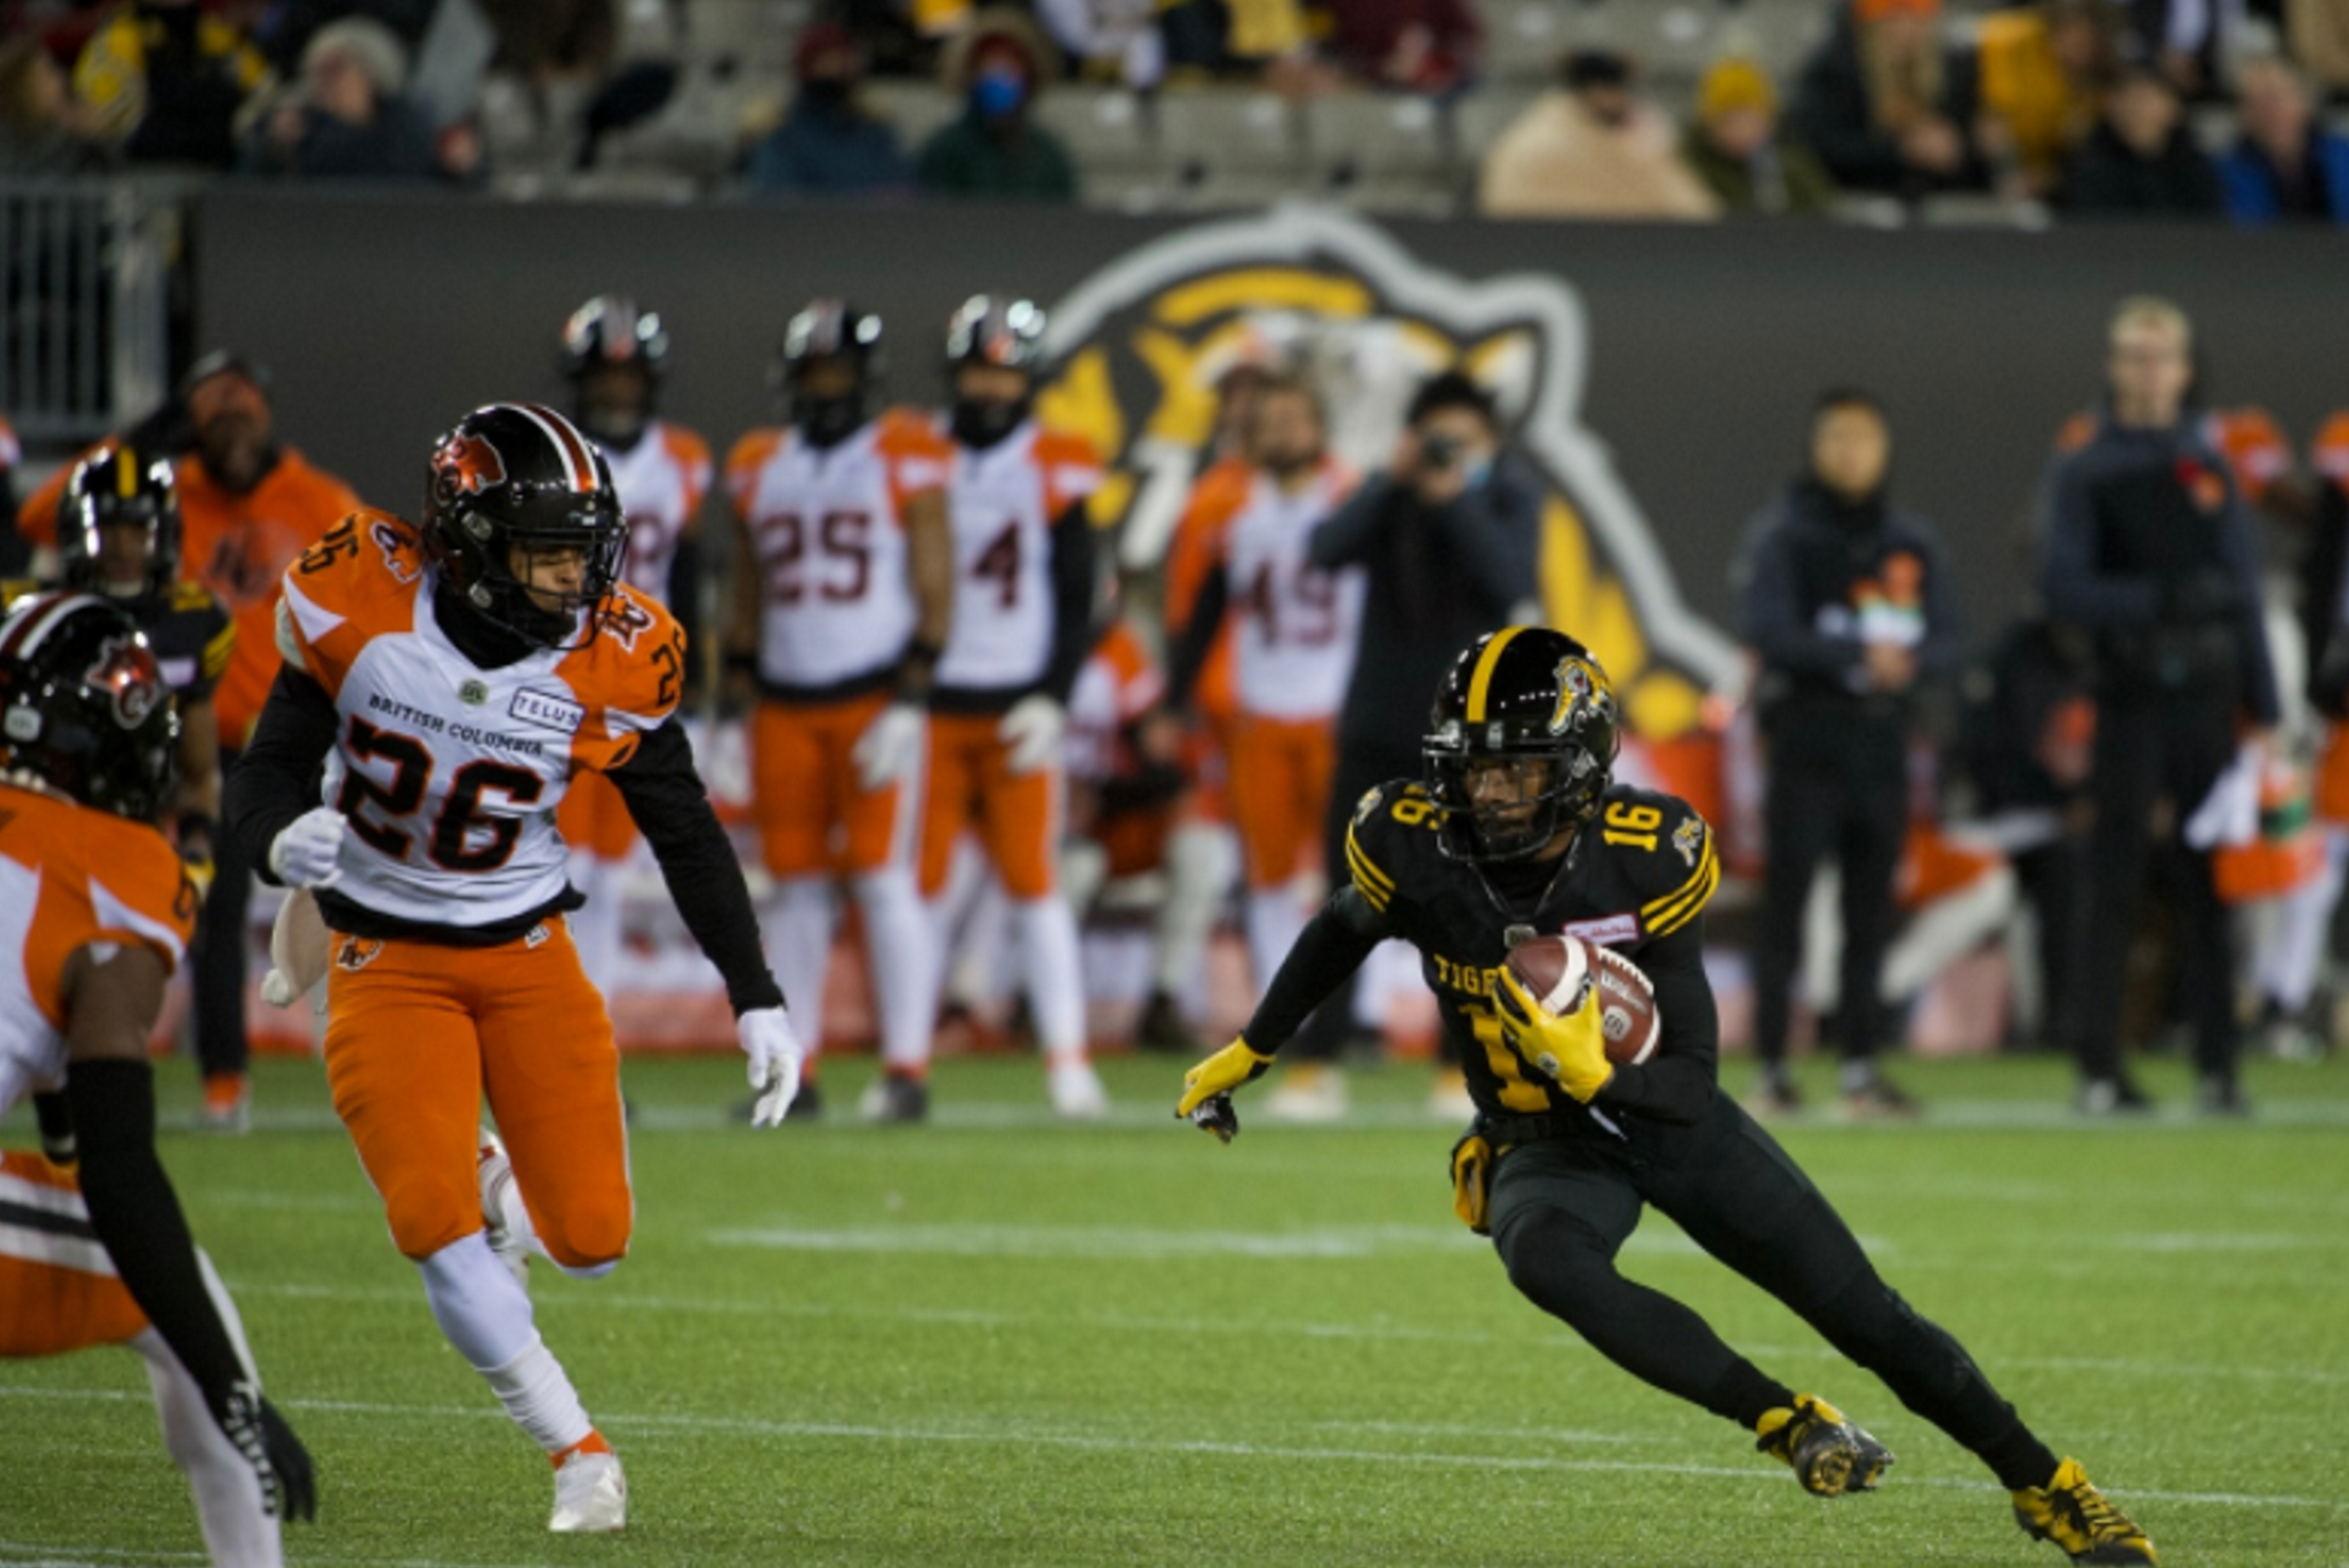 Tiger-Cats clinch playoff spot with win over BC Lions